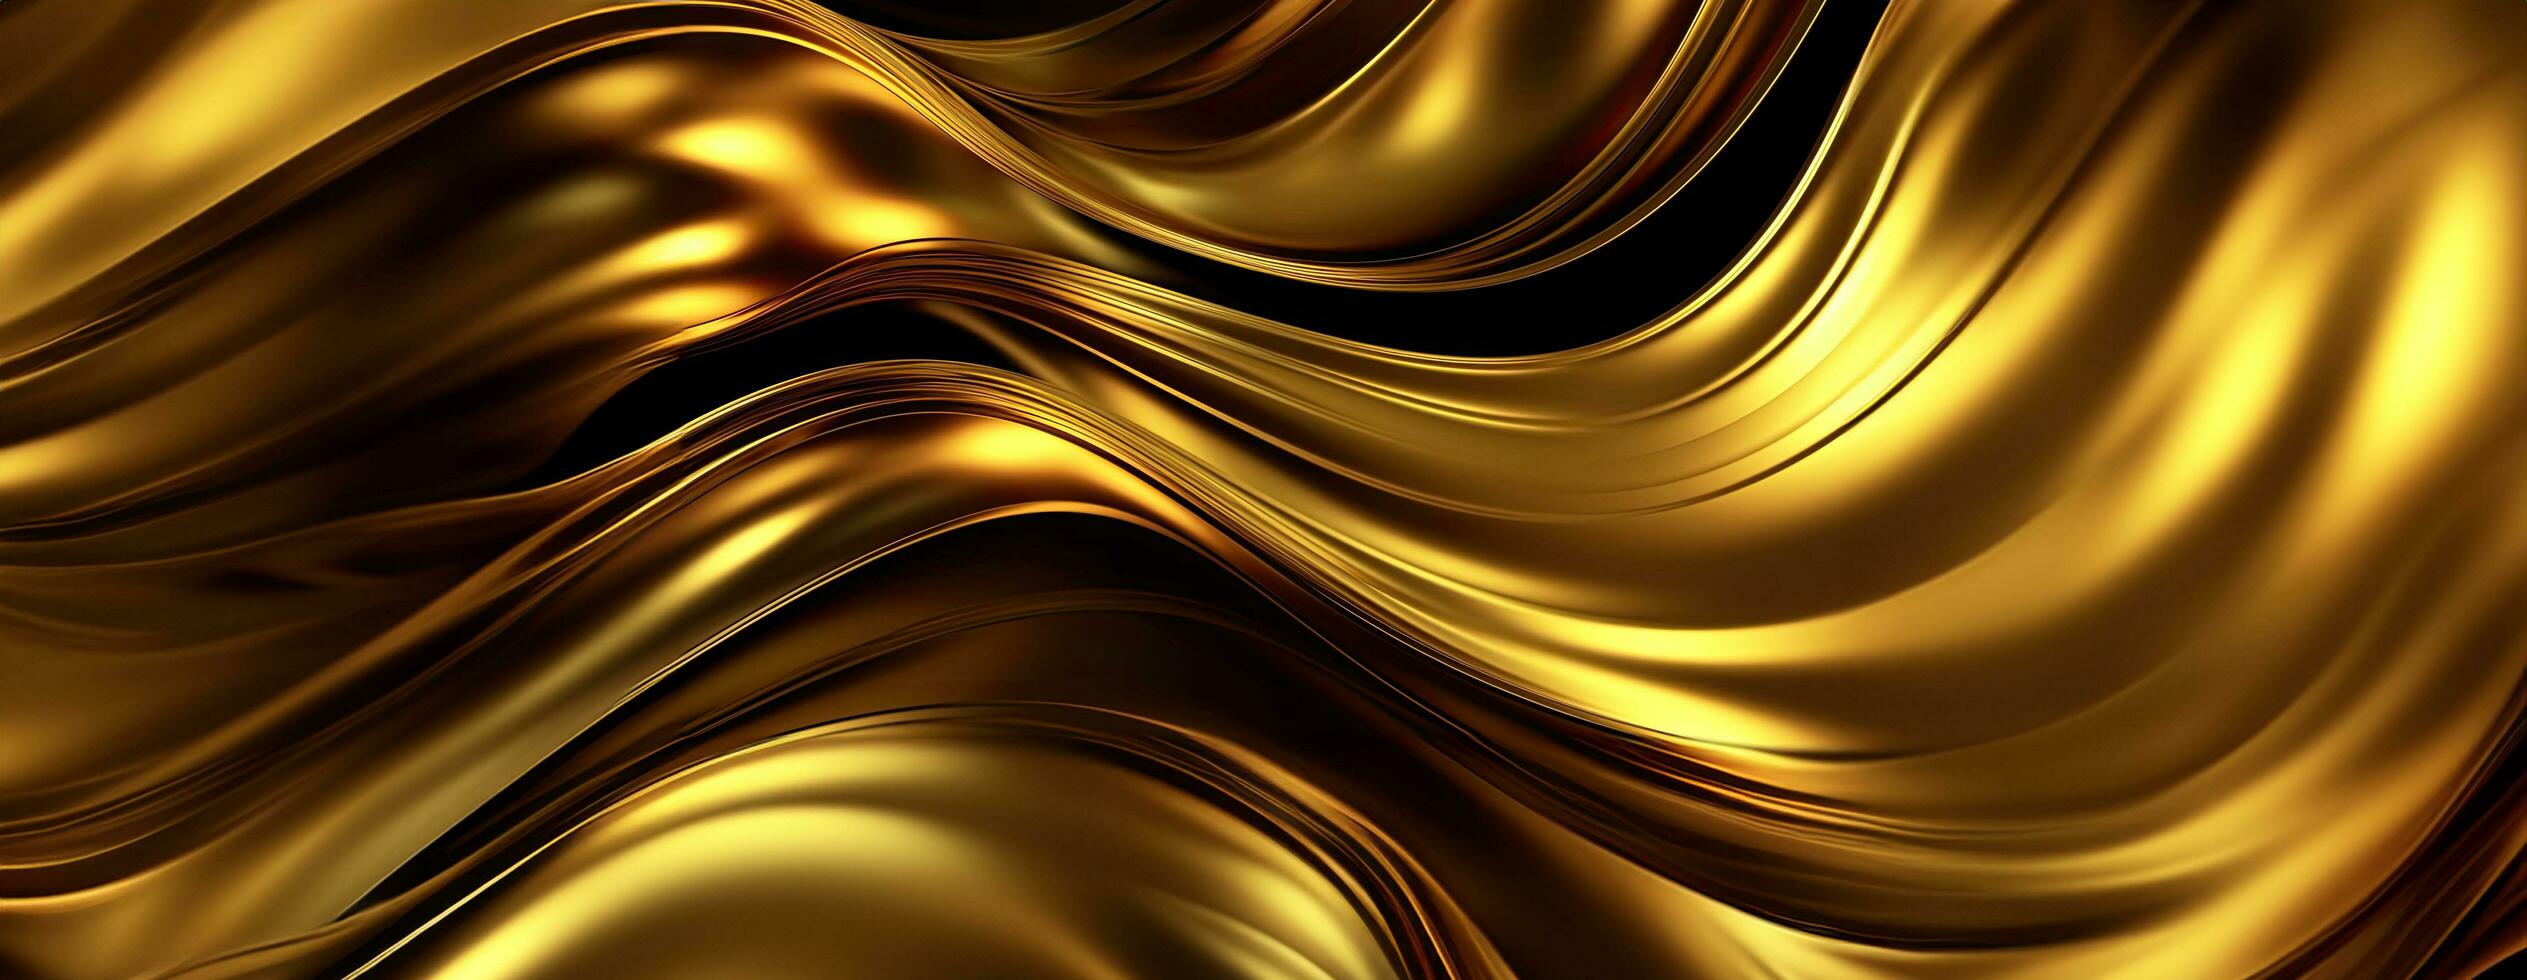 Gold Texture Stock Photos, Images and Backgrounds for Free Download